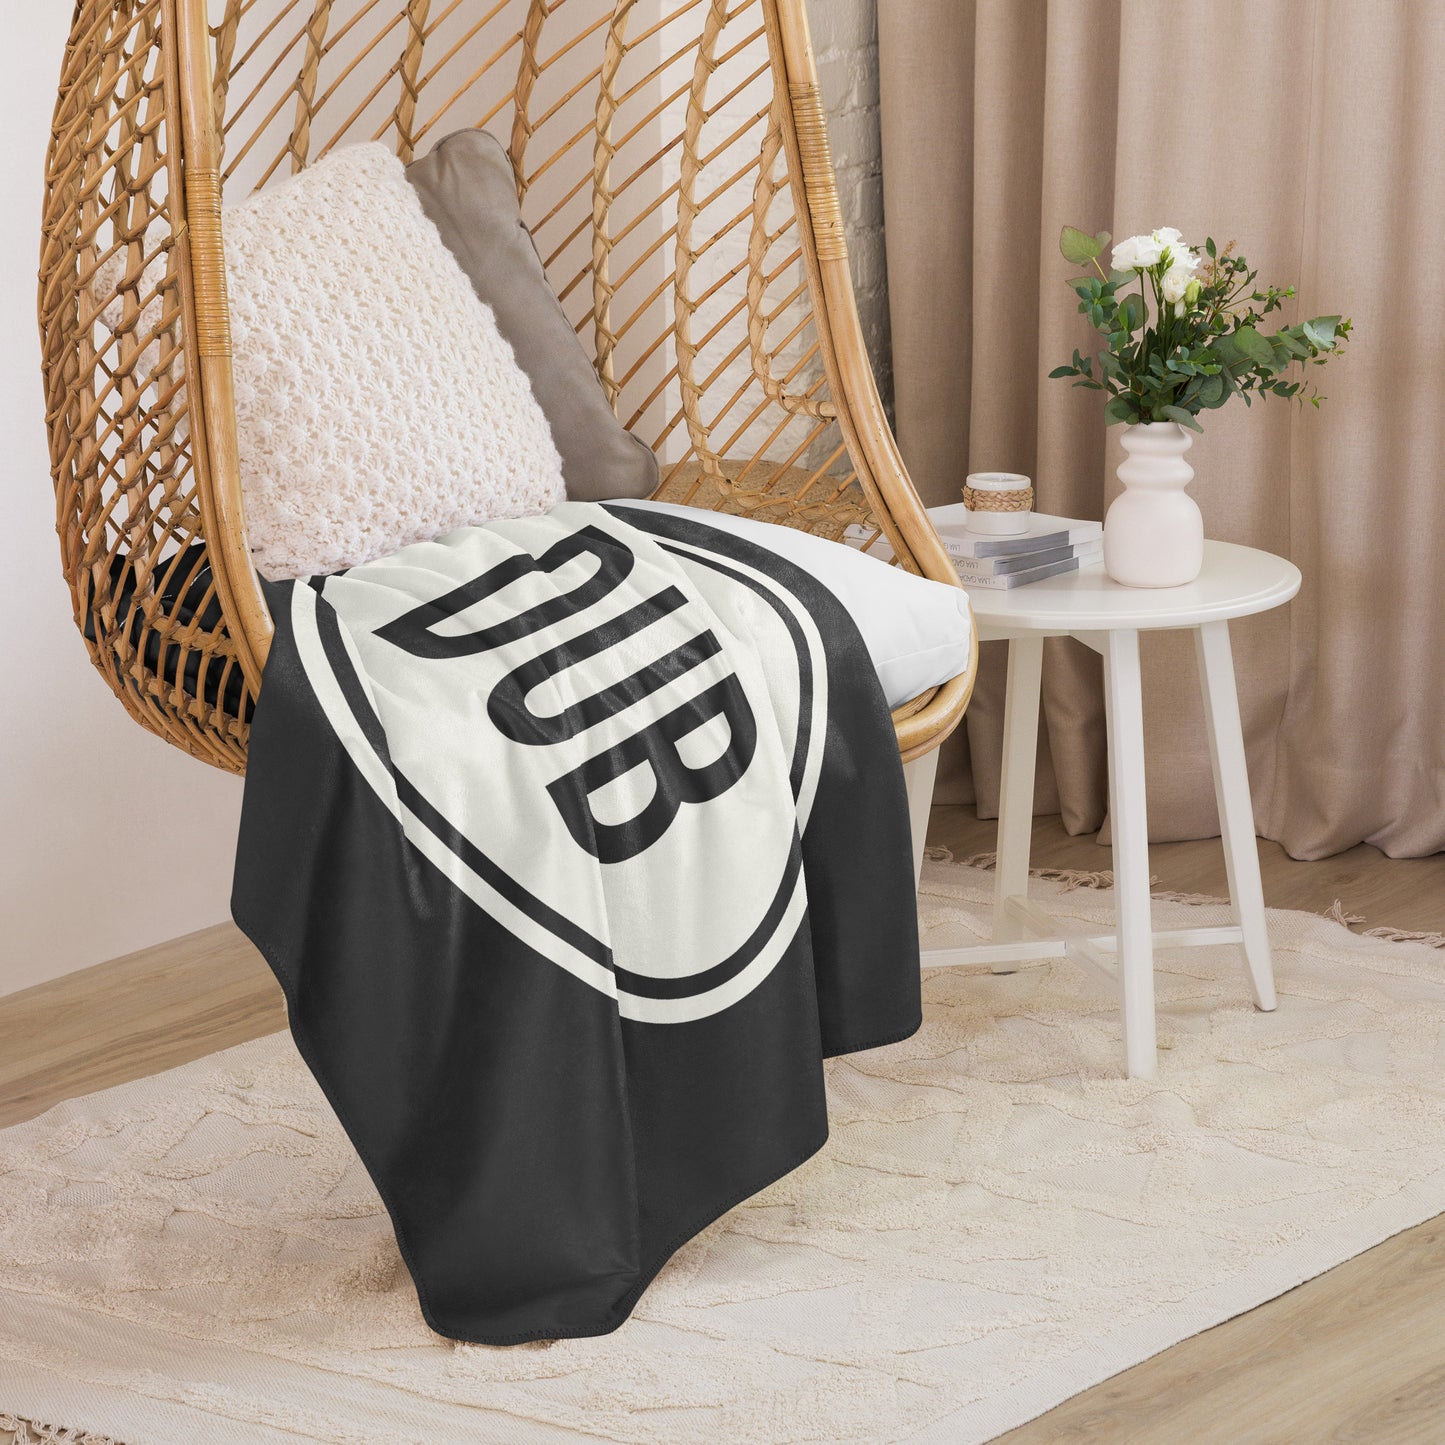 Unique Travel Gift Sherpa Blanket - White Oval • DUB Dublin • YHM Designs - Image 06